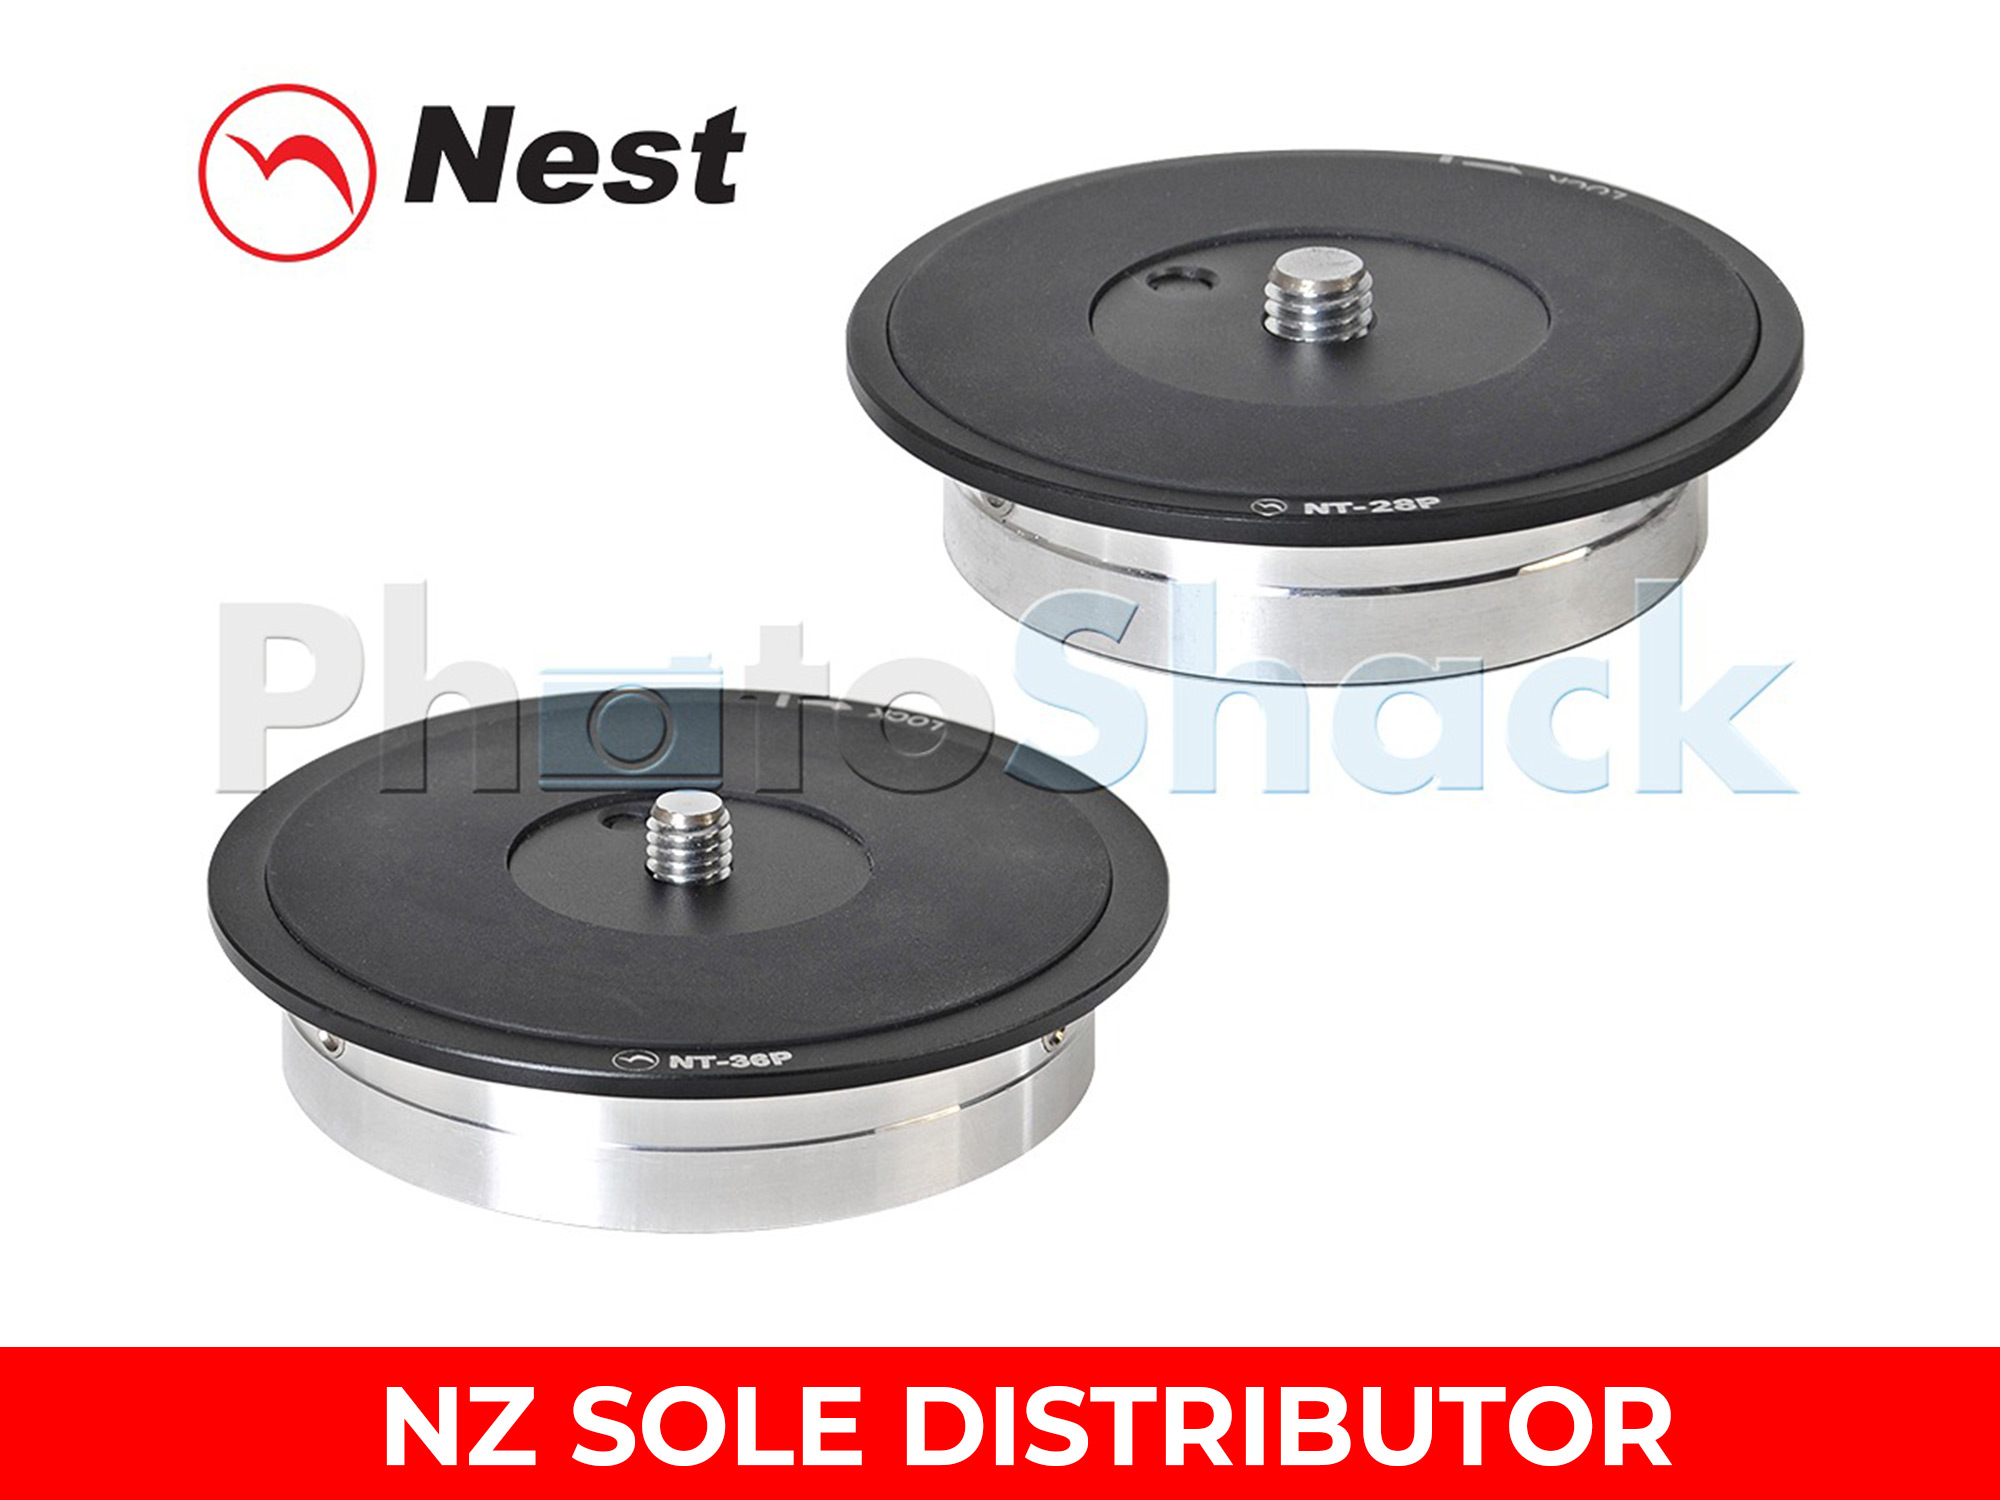 Nest Flat Adapter for Sliders, Booms and Jibs